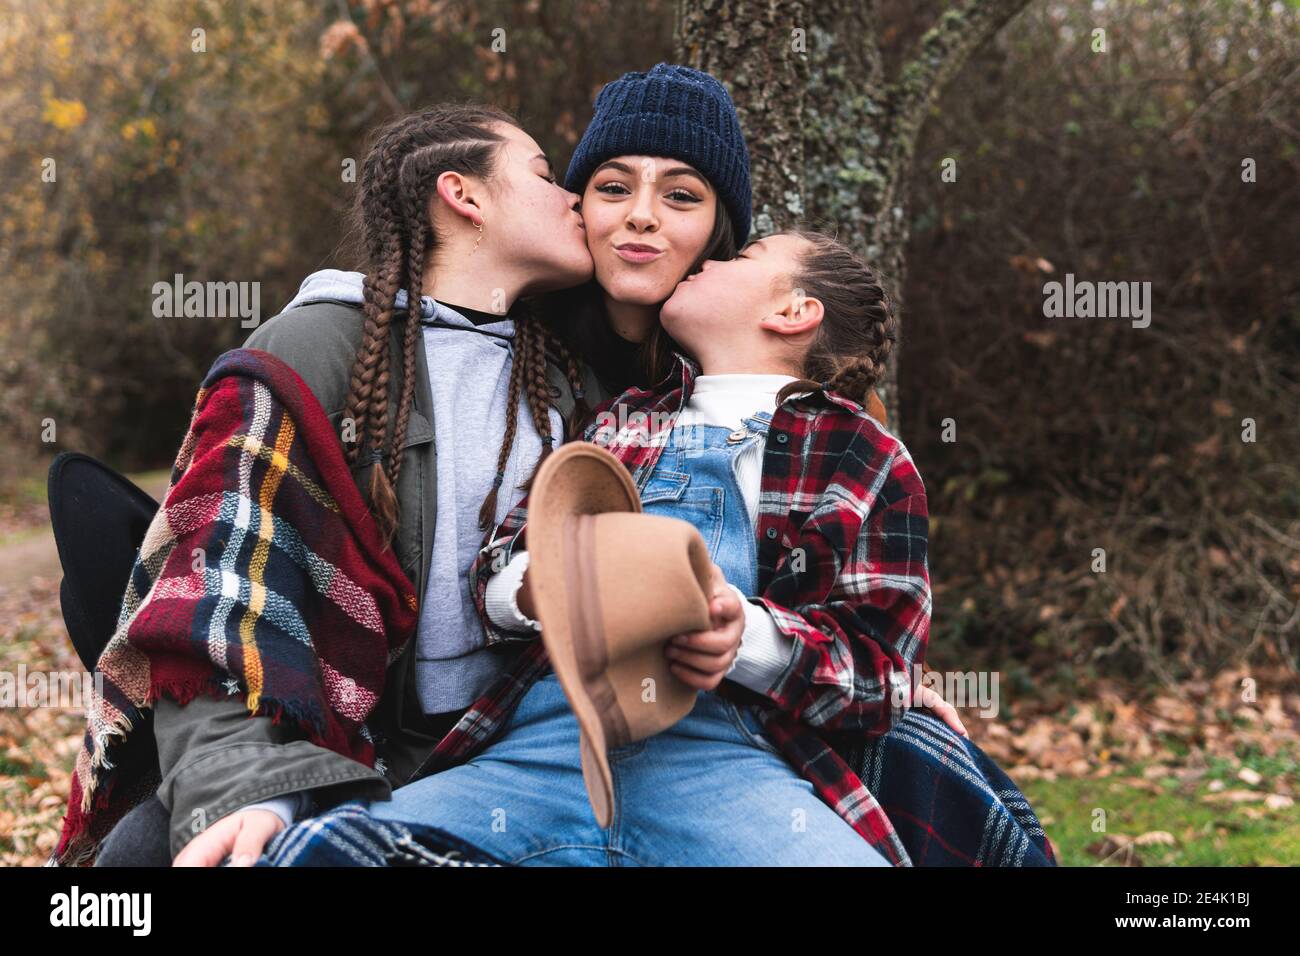 Two girls kissing sister in Autumn landscape Stock Photo